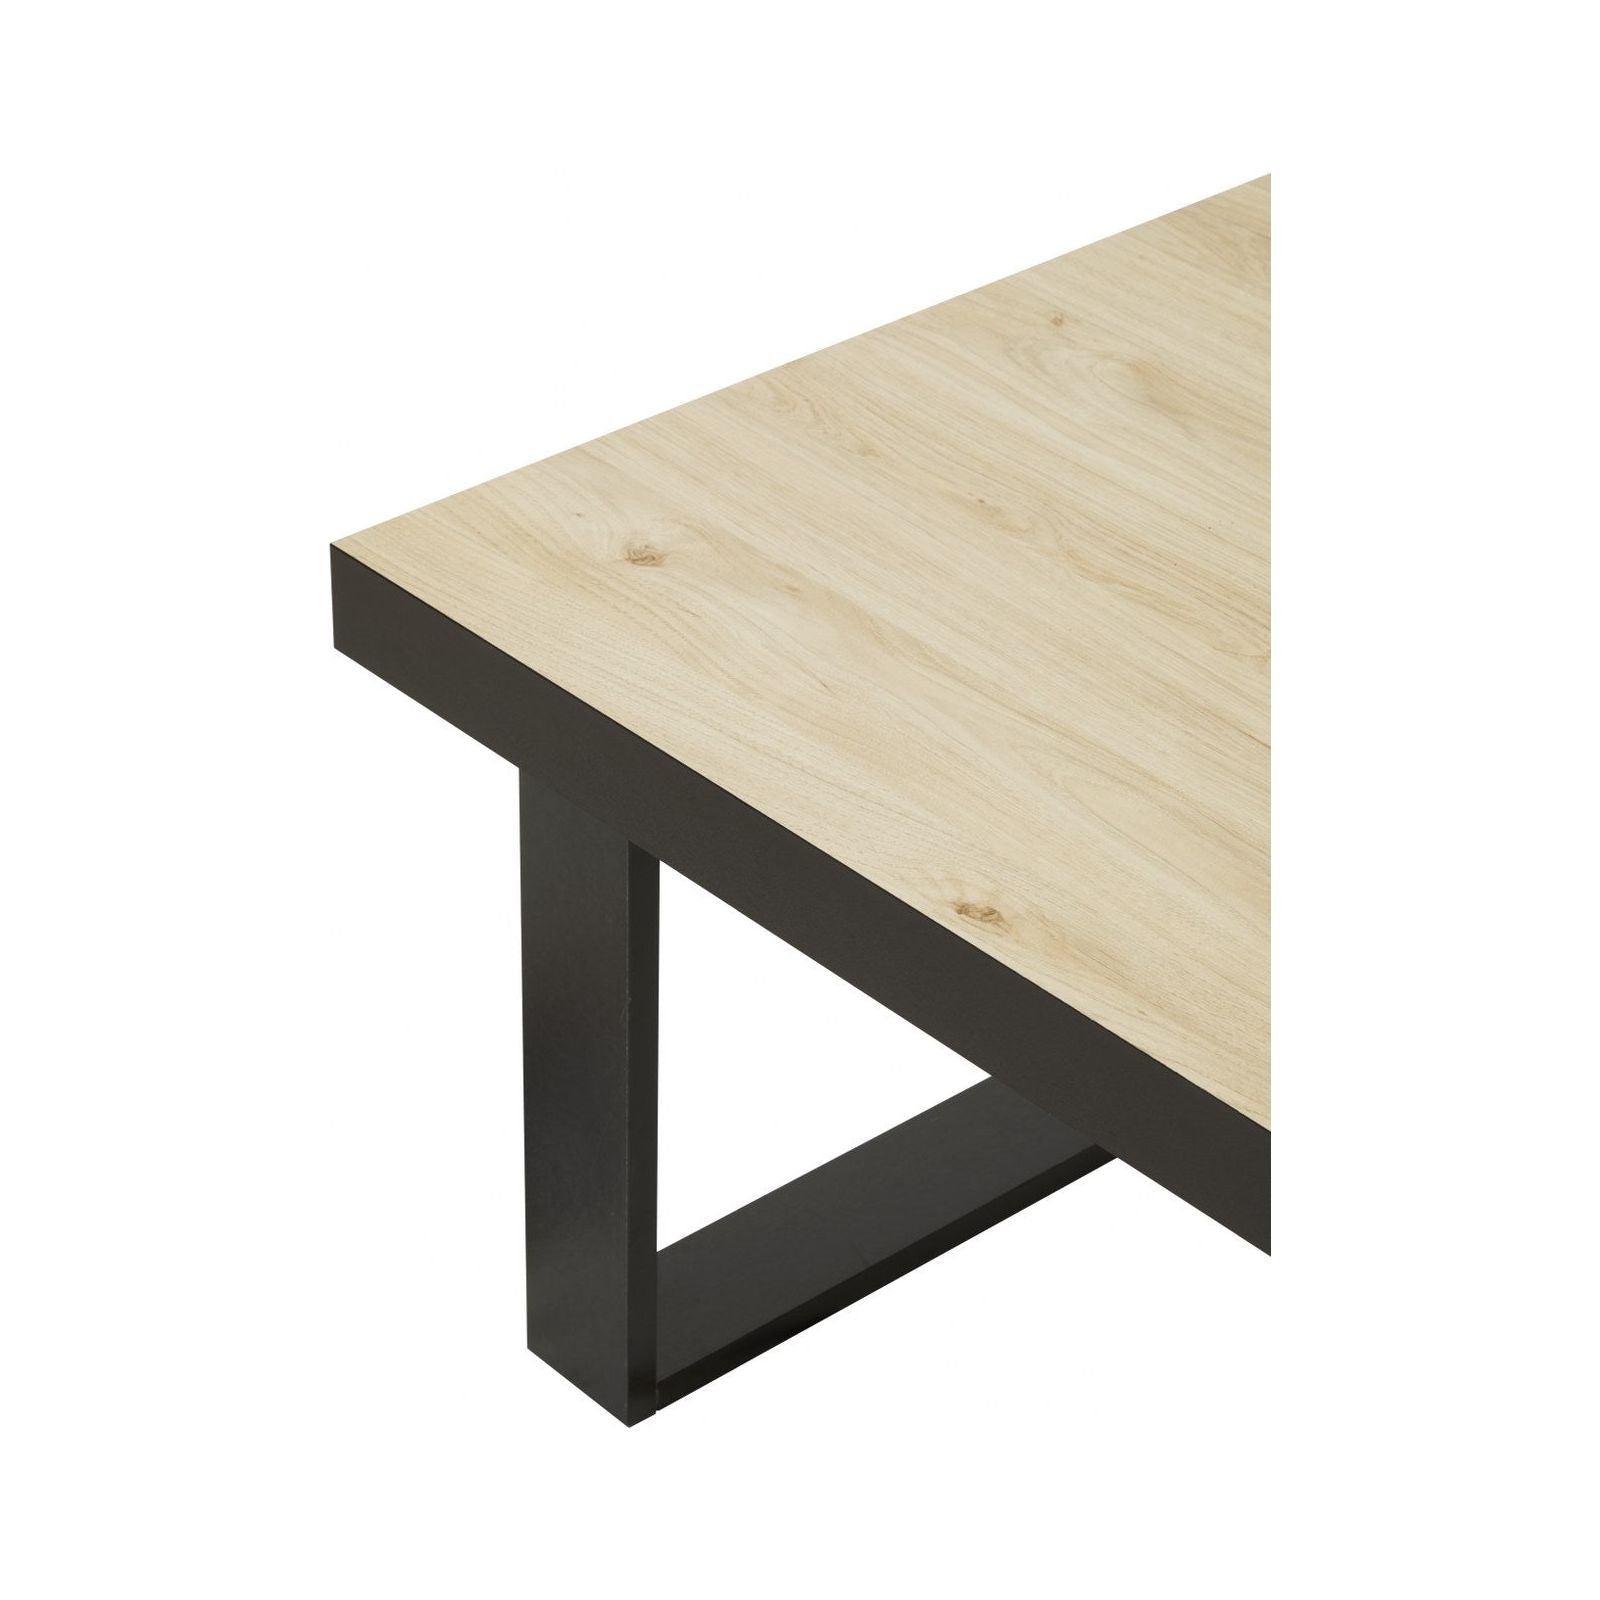 Coffee table | Furniture series Tilly | brown, natural, black | 130